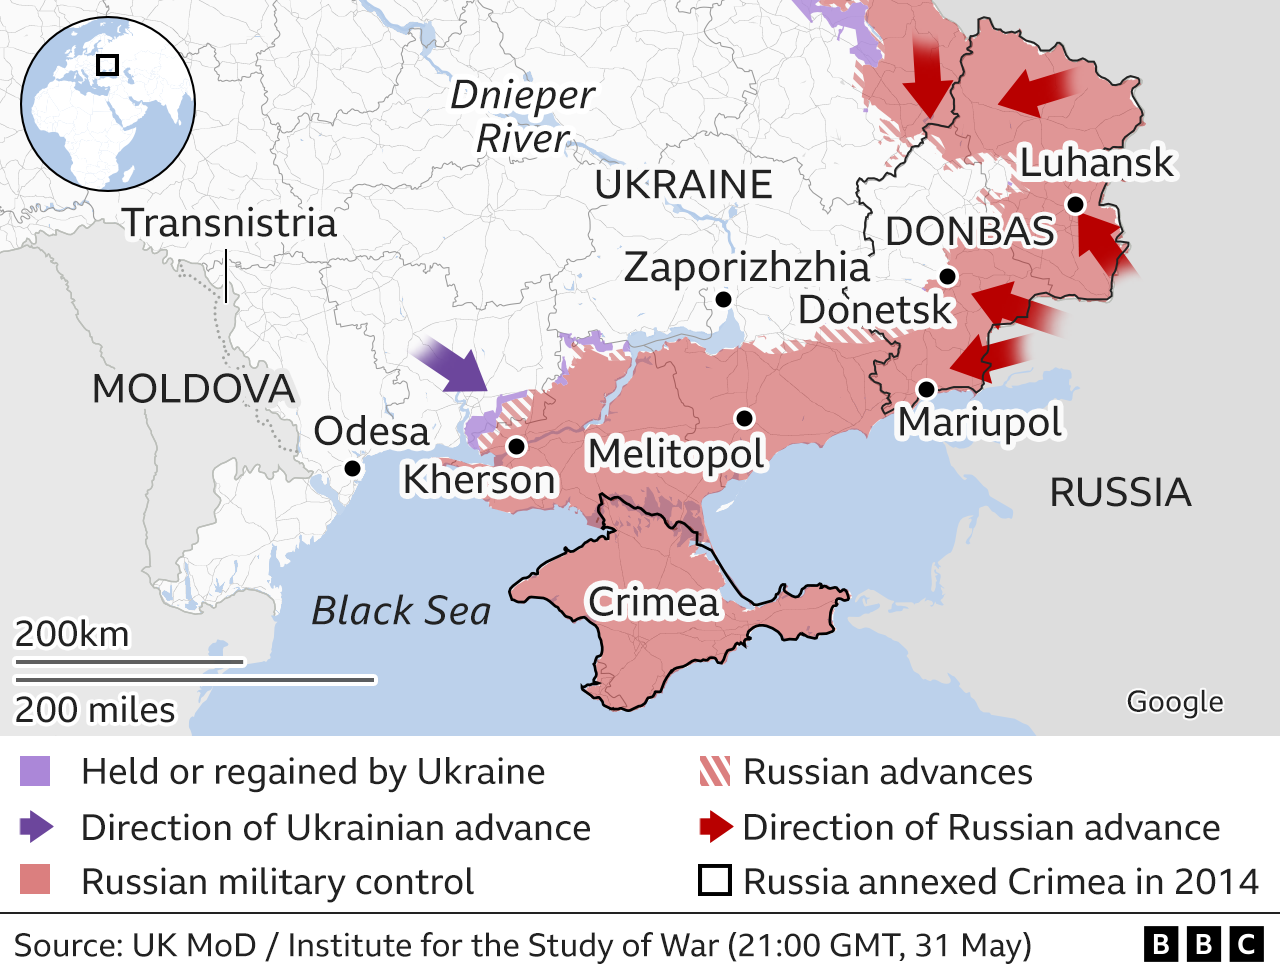 https://ichef.bbci.co.uk/news/976/cpsprodpb/5A95/production/_124998132_ukraine_invasion_south_map-nc.png